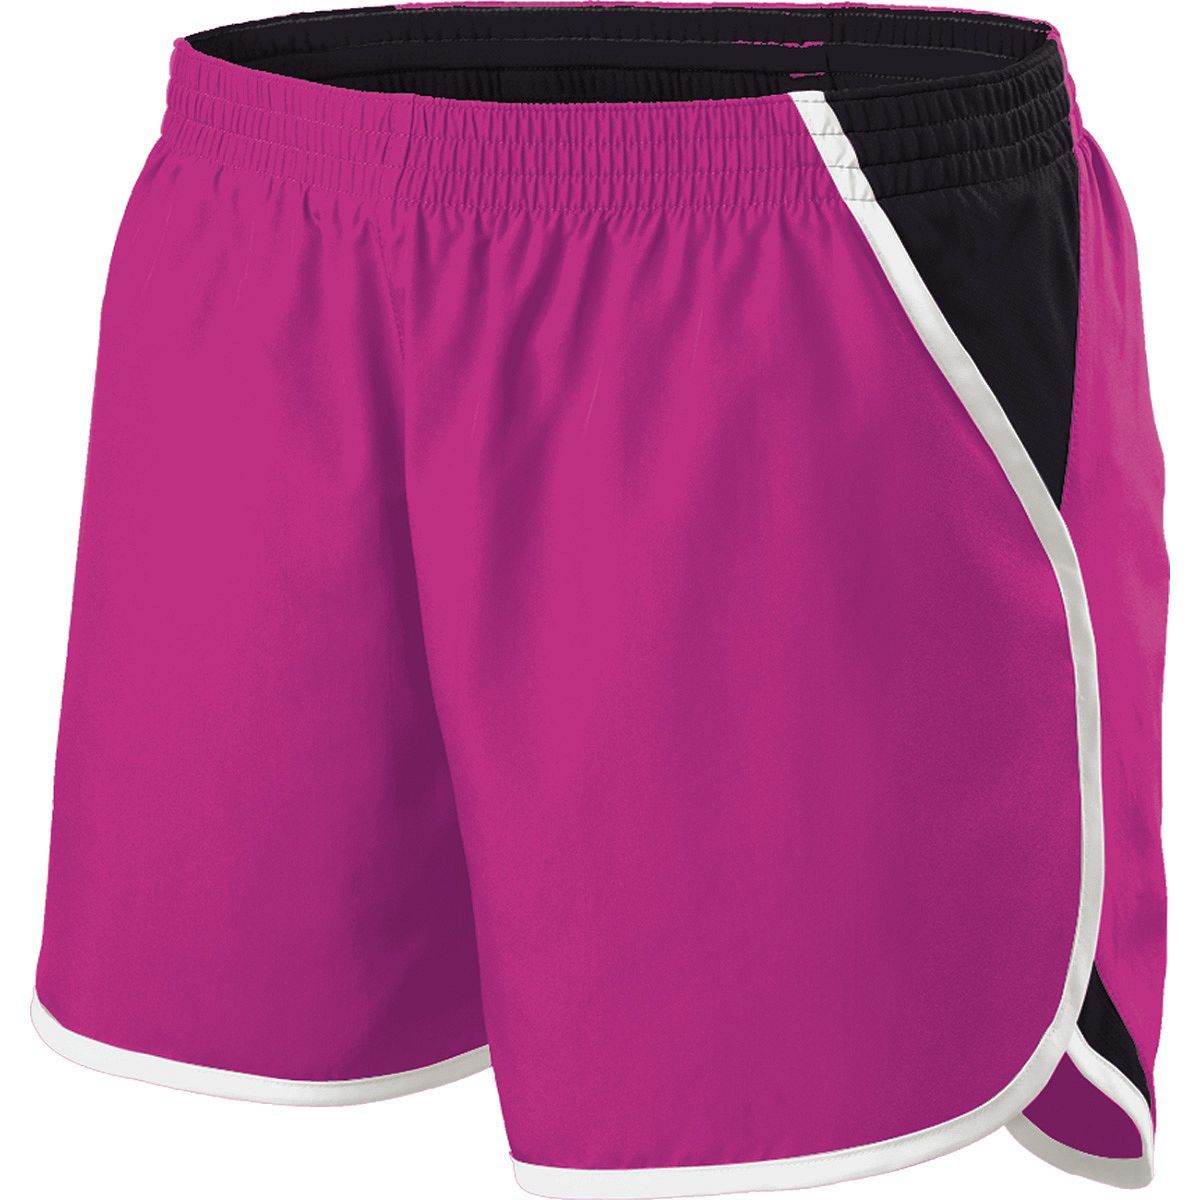 Holloway Girls Energize Shorts in Power Pink/Black/White  -Part of the Girls, Holloway, Girls-Shorts product lines at KanaleyCreations.com